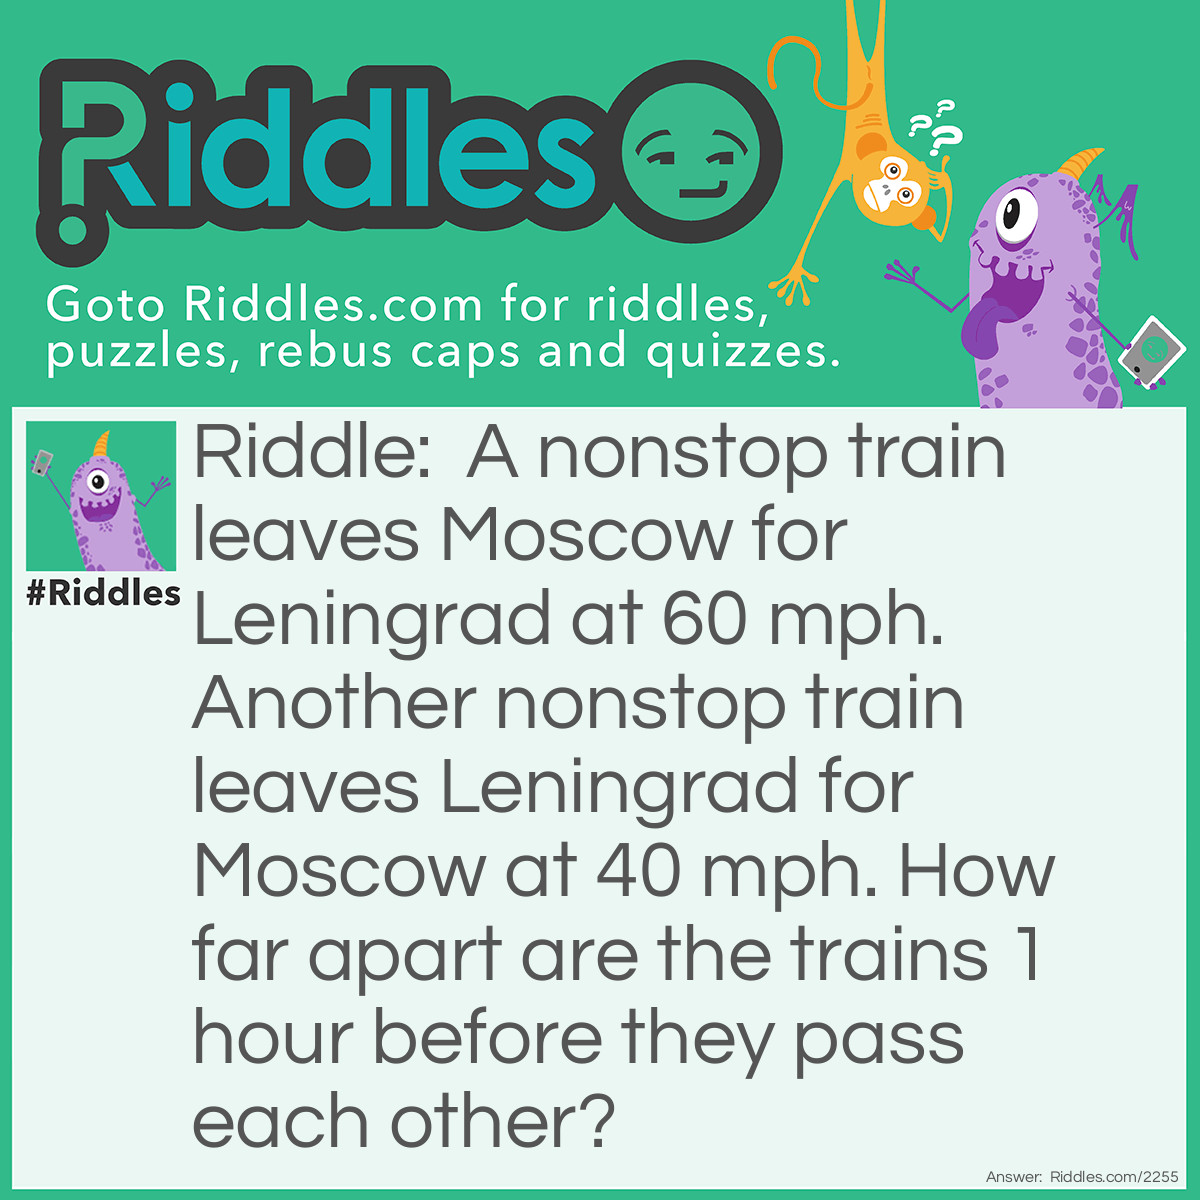 Riddle: A nonstop train leaves Moscow for Leningrad at 60 mph. Another nonstop train leaves Leningrad for Moscow at 40 mph. How far apart are the trains 1 hour before they pass each other? Answer: 100 miles (60+40)